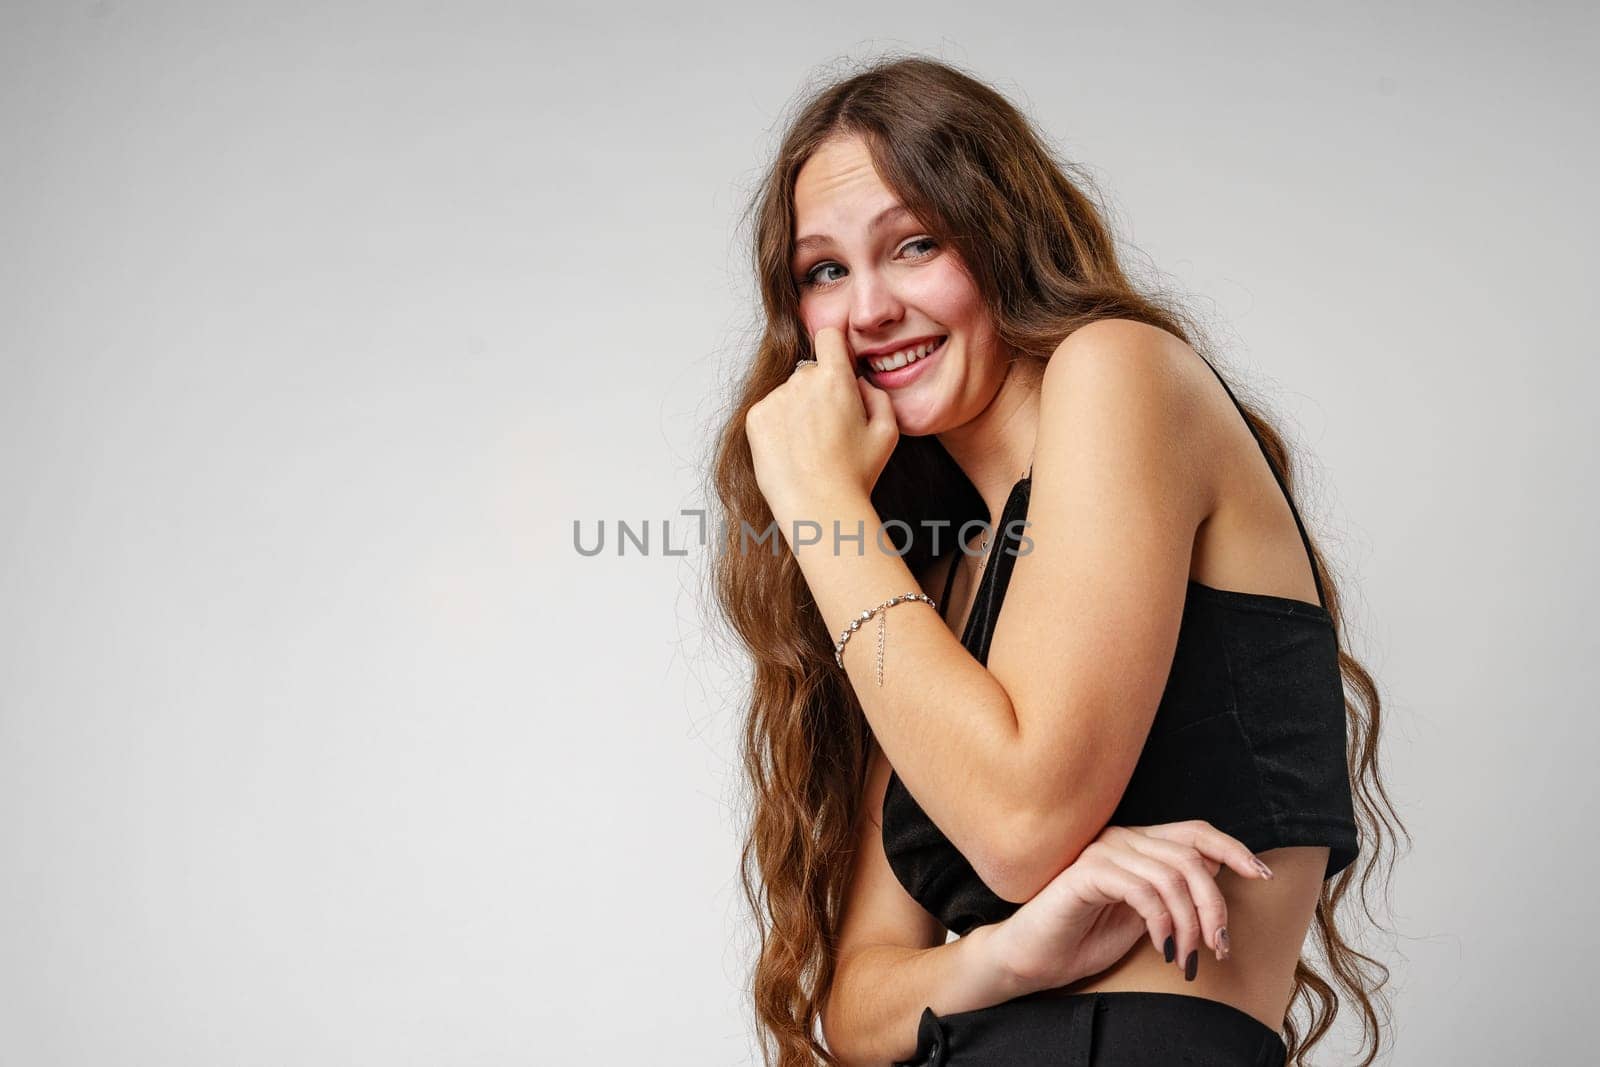 A young woman with long, wavy hair is captured posing expressively with her hand on her cheek and a broad, engaging smile. She is wearing a sleeveless black top which contrasts against a simple, grey backdrop. Her lively expression suggests a moment of genuine happiness or amusement.